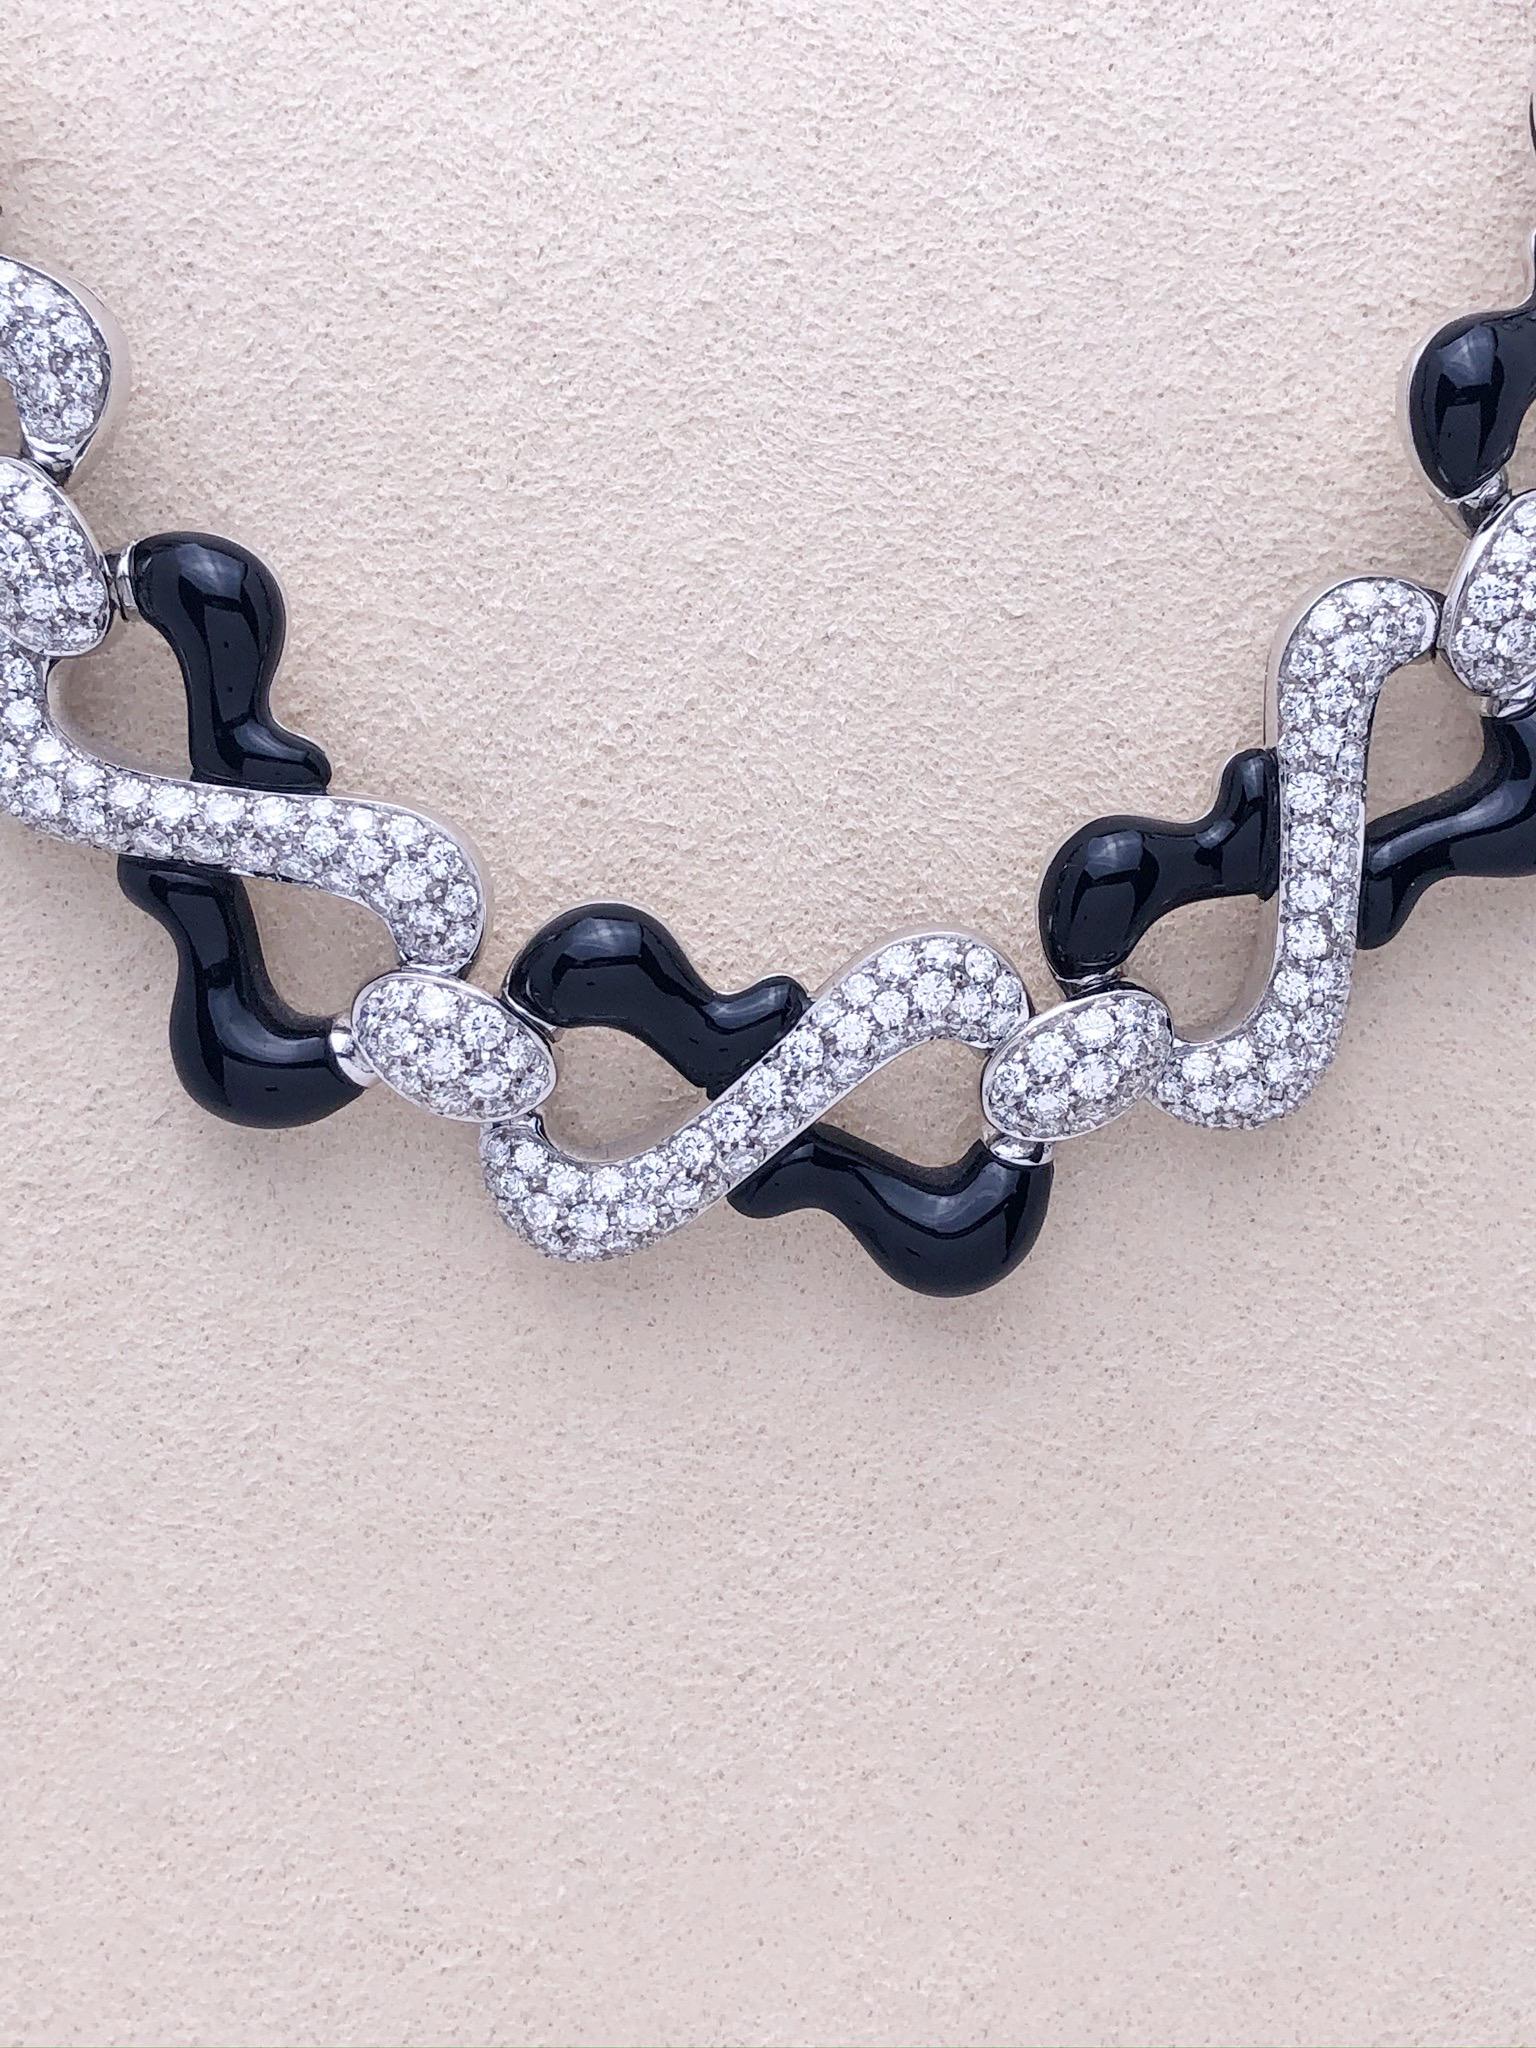 Designed by the renowned luxury jeweler Giuseppe Picchiotti ,this diamond and onyx necklace are clear examples of his iconic style. Free formed flat links of 18 karat white gold are pave set with round brilliant diamonds and black onyx for a